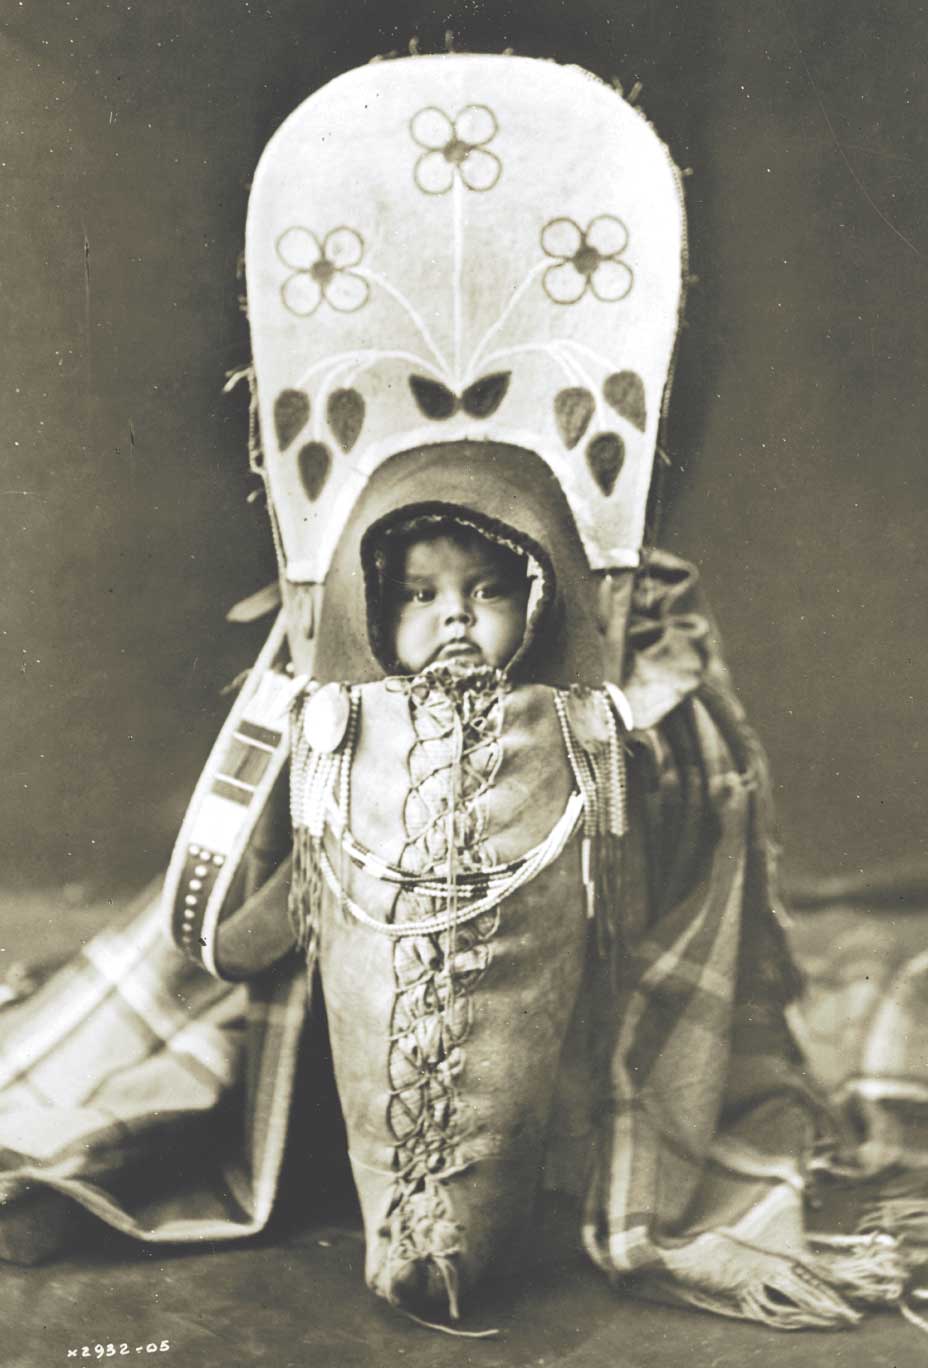 The cradleboard was used to carry a baby on the back of the mother